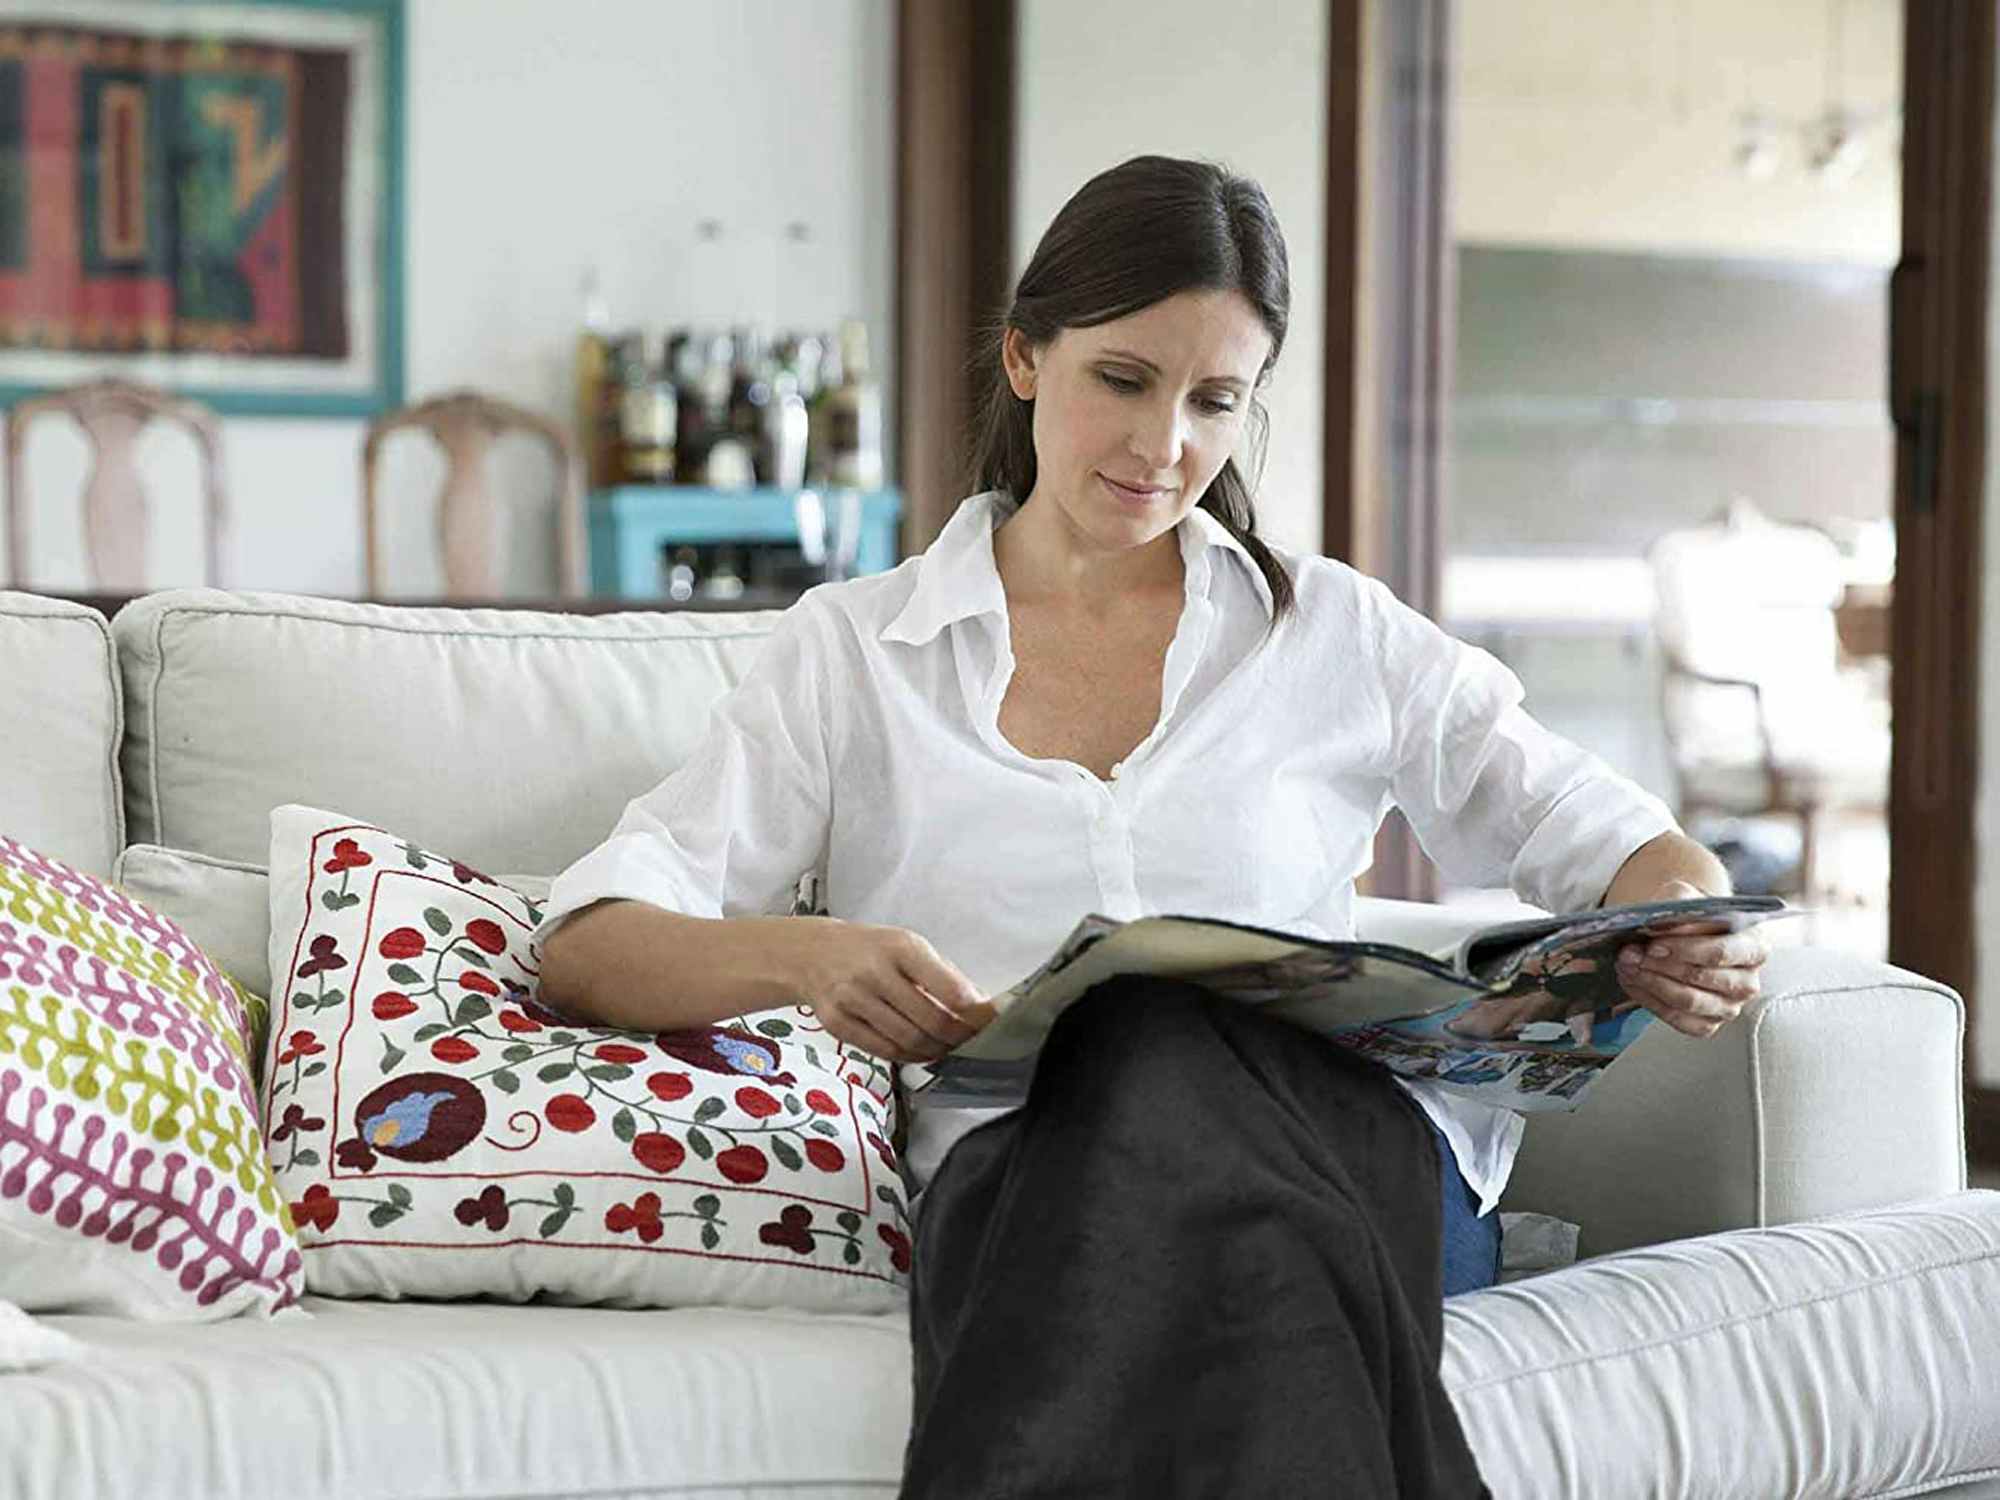 a person reading magazines on a couch